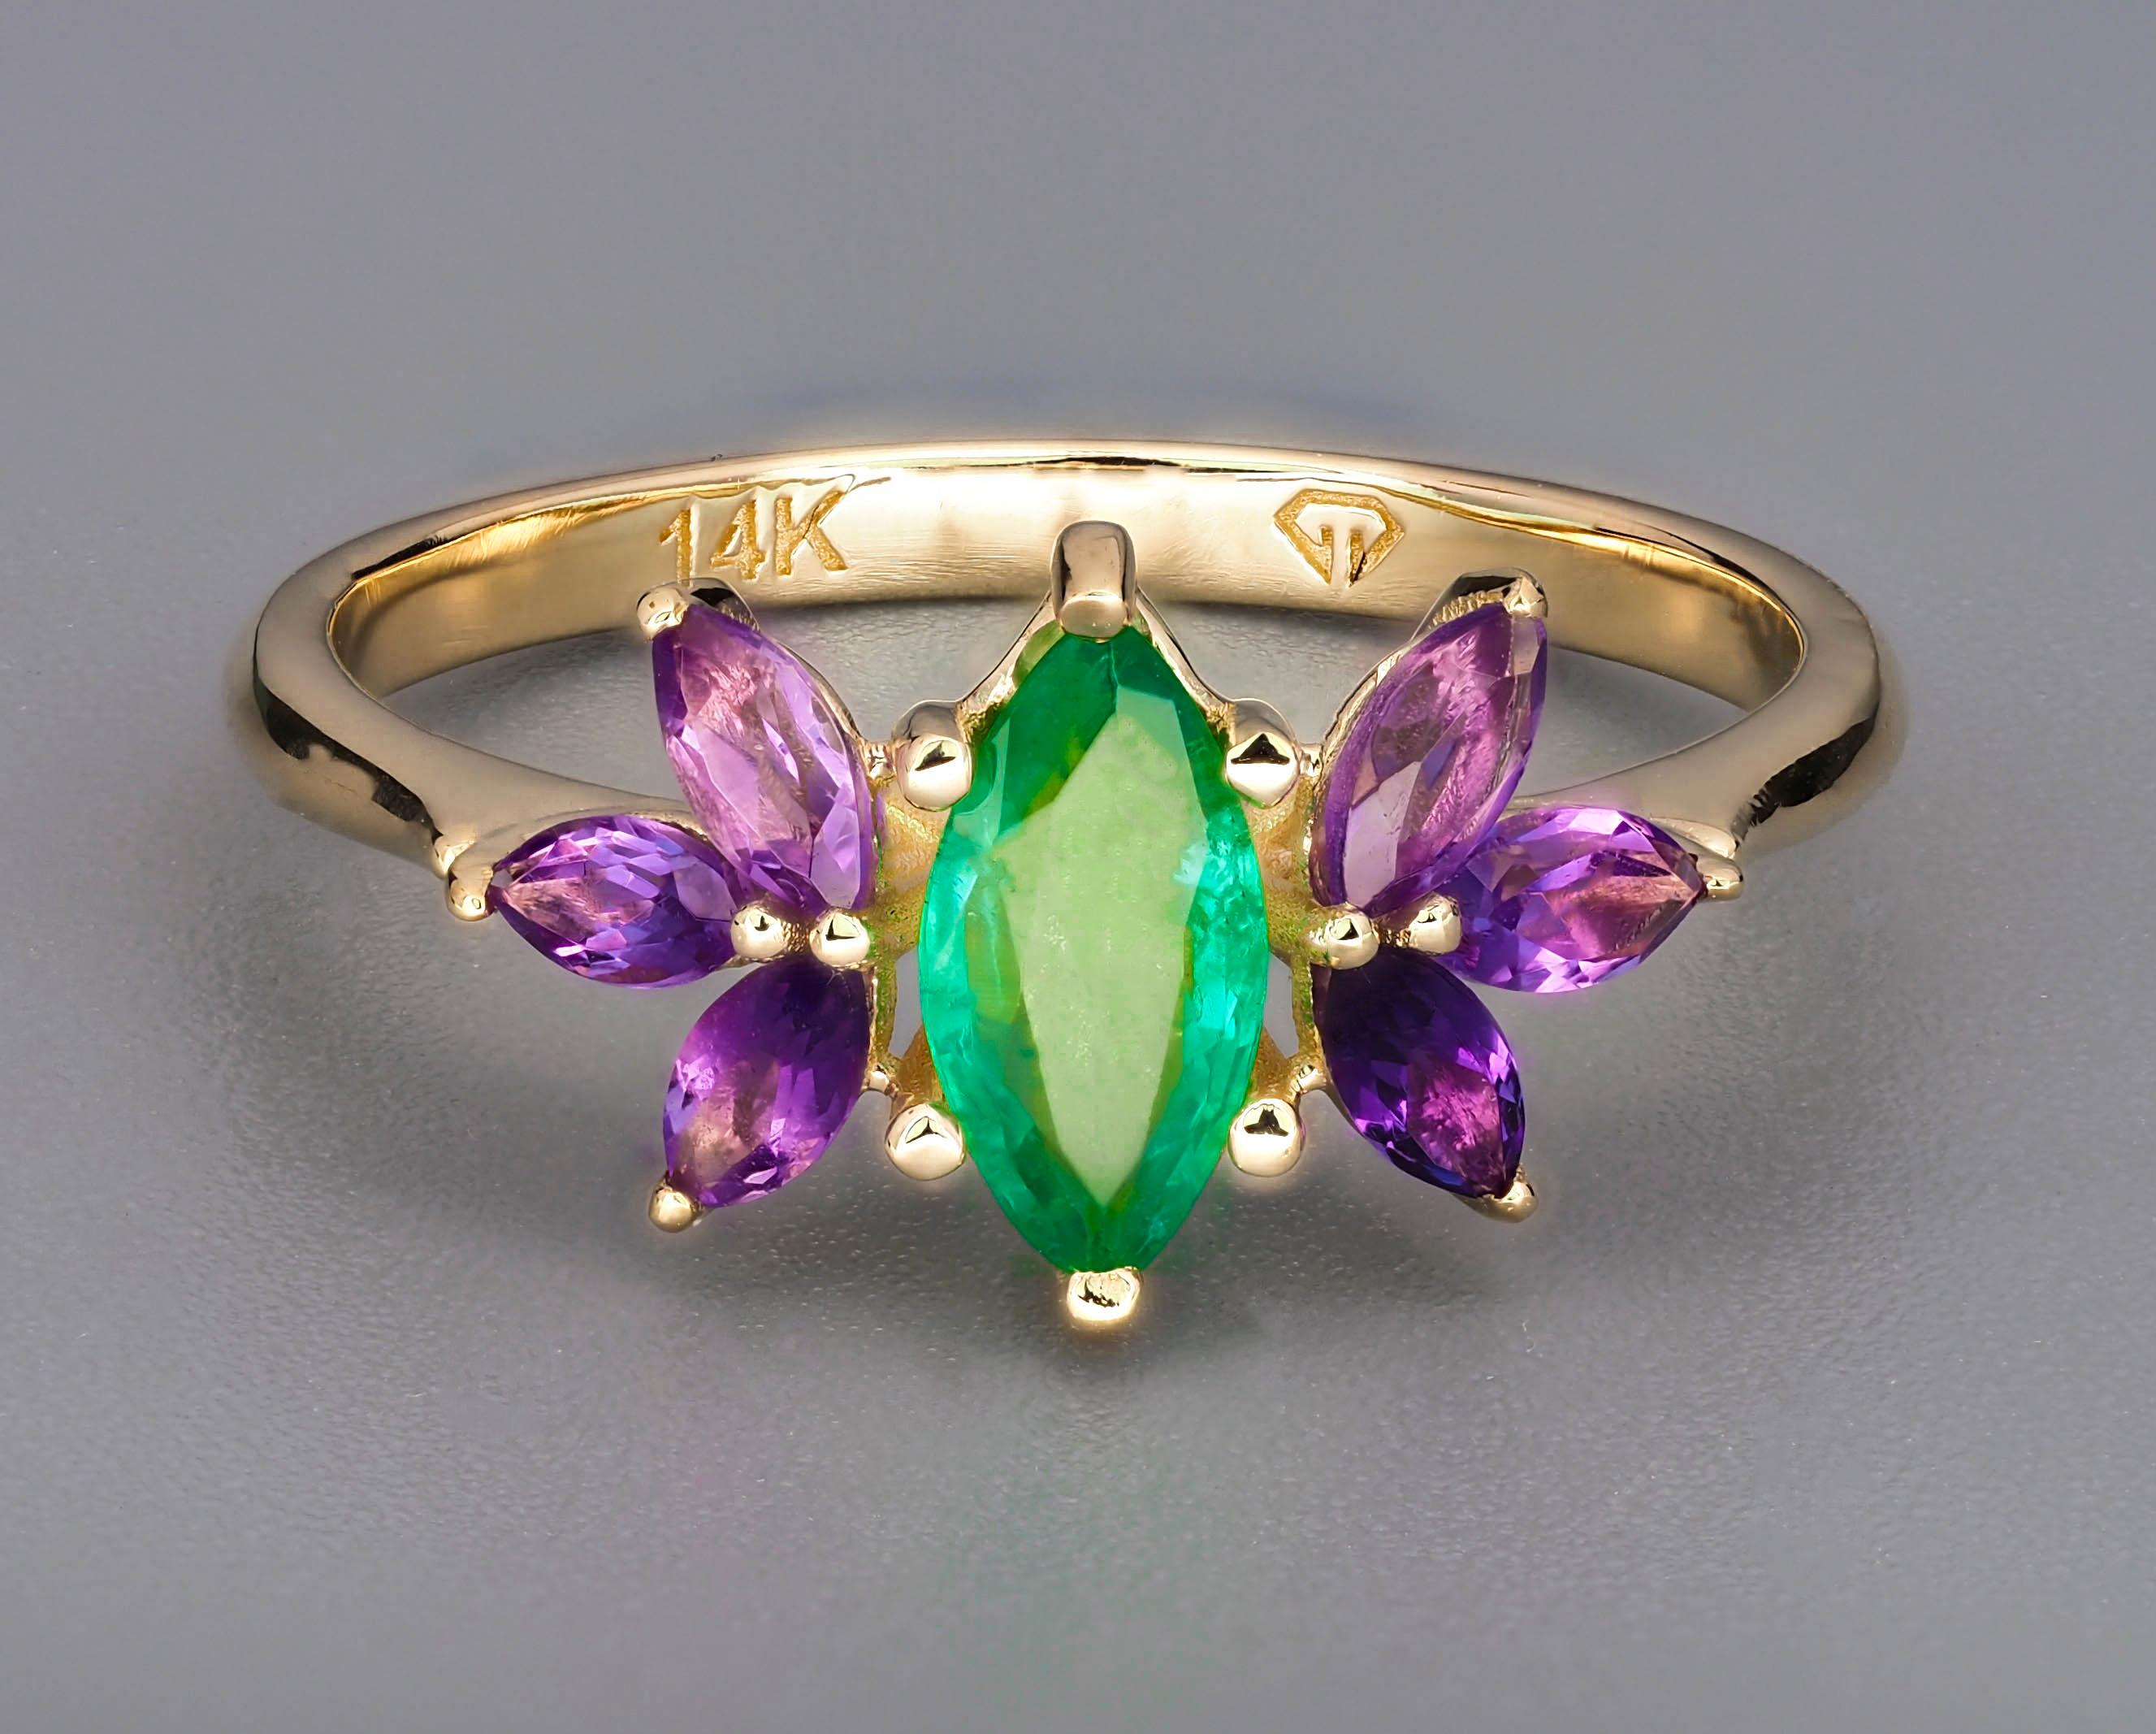 For Sale:  Emerald gold ring. 14k Gold Ring with Marquise Emerald and Amethysts.  3